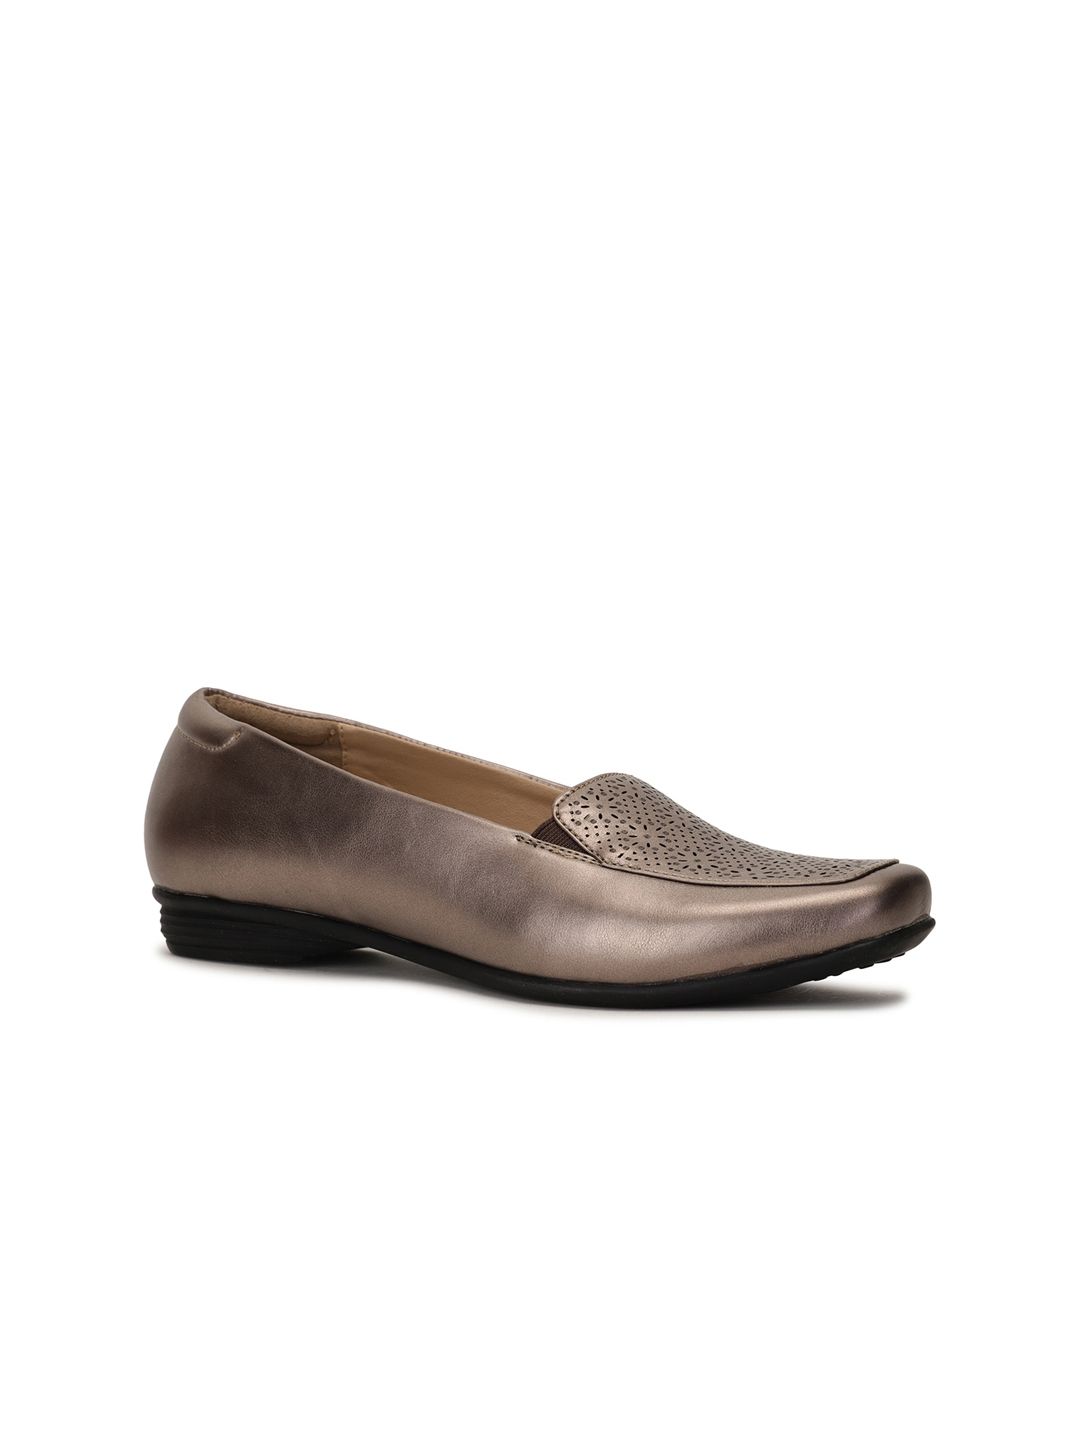 Bata Women Gunmetal-Toned Textured Leather Party Ballerinas with Laser Cuts Flats Price in India